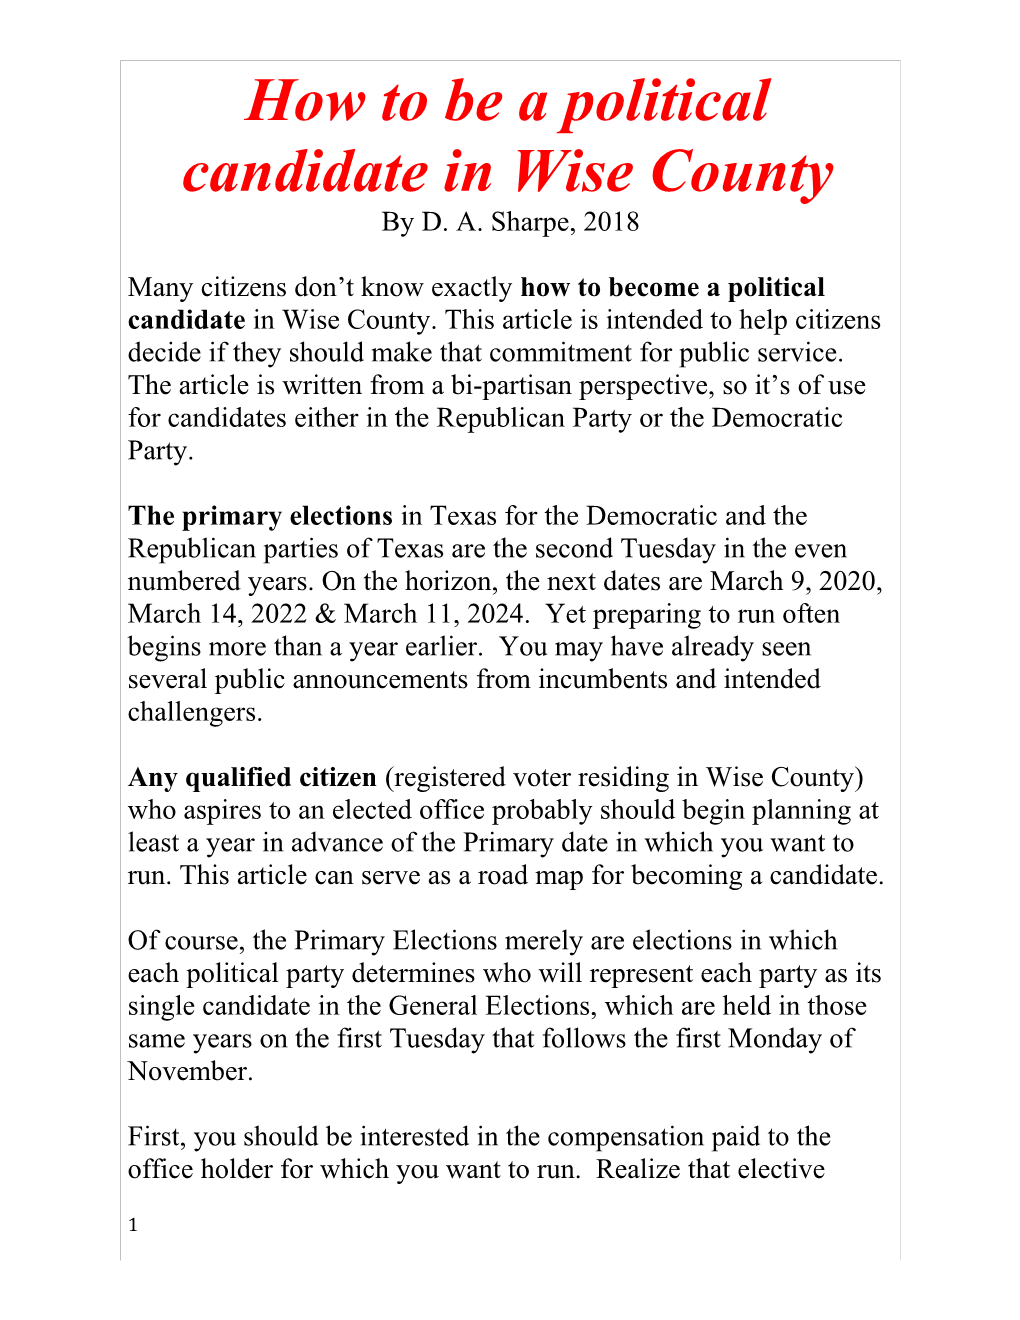 How to Be a Political Candidate in Wise County